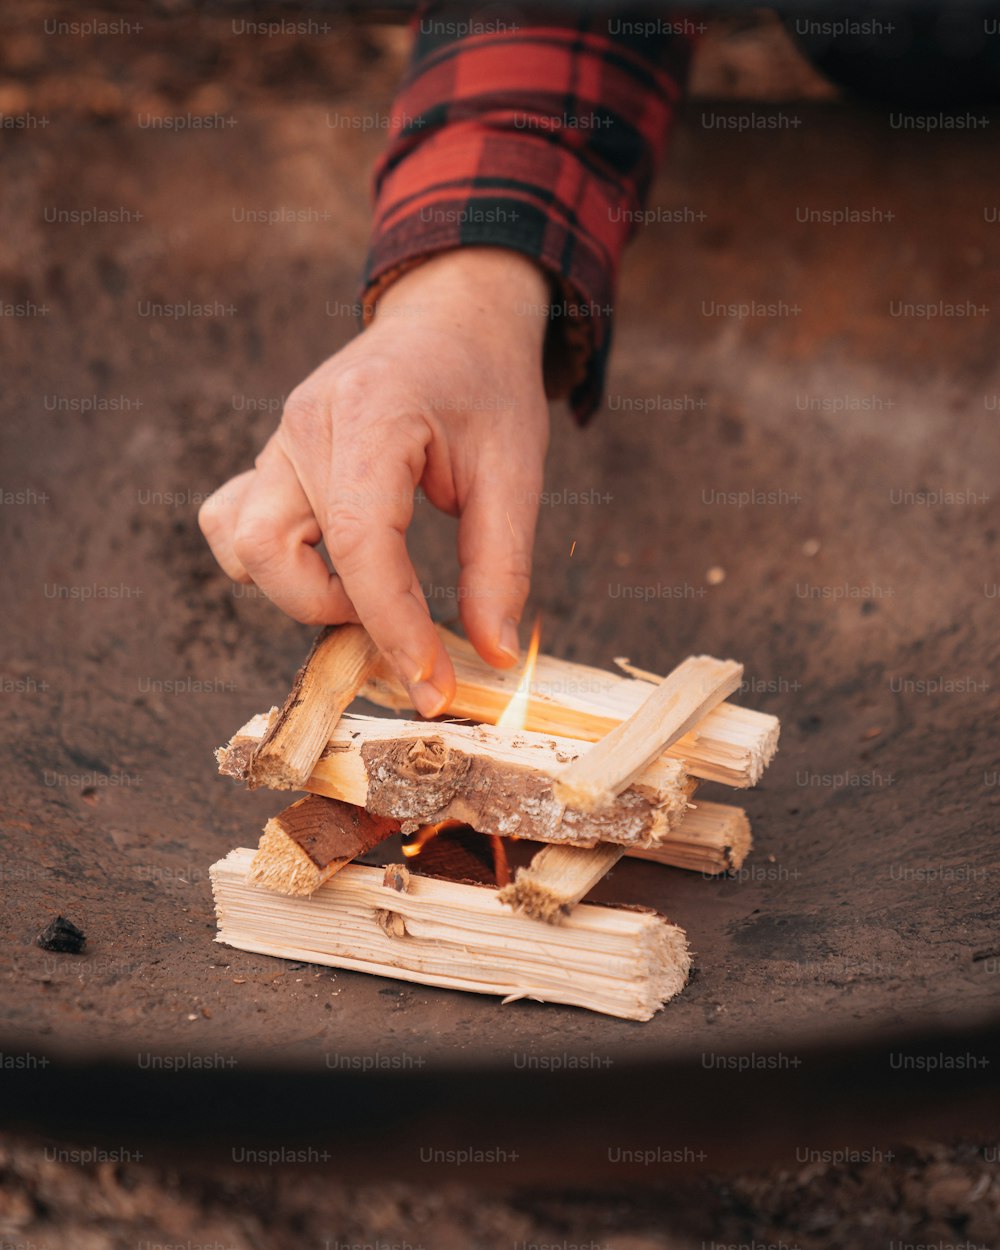 a person holding a lit match over a pile of wood